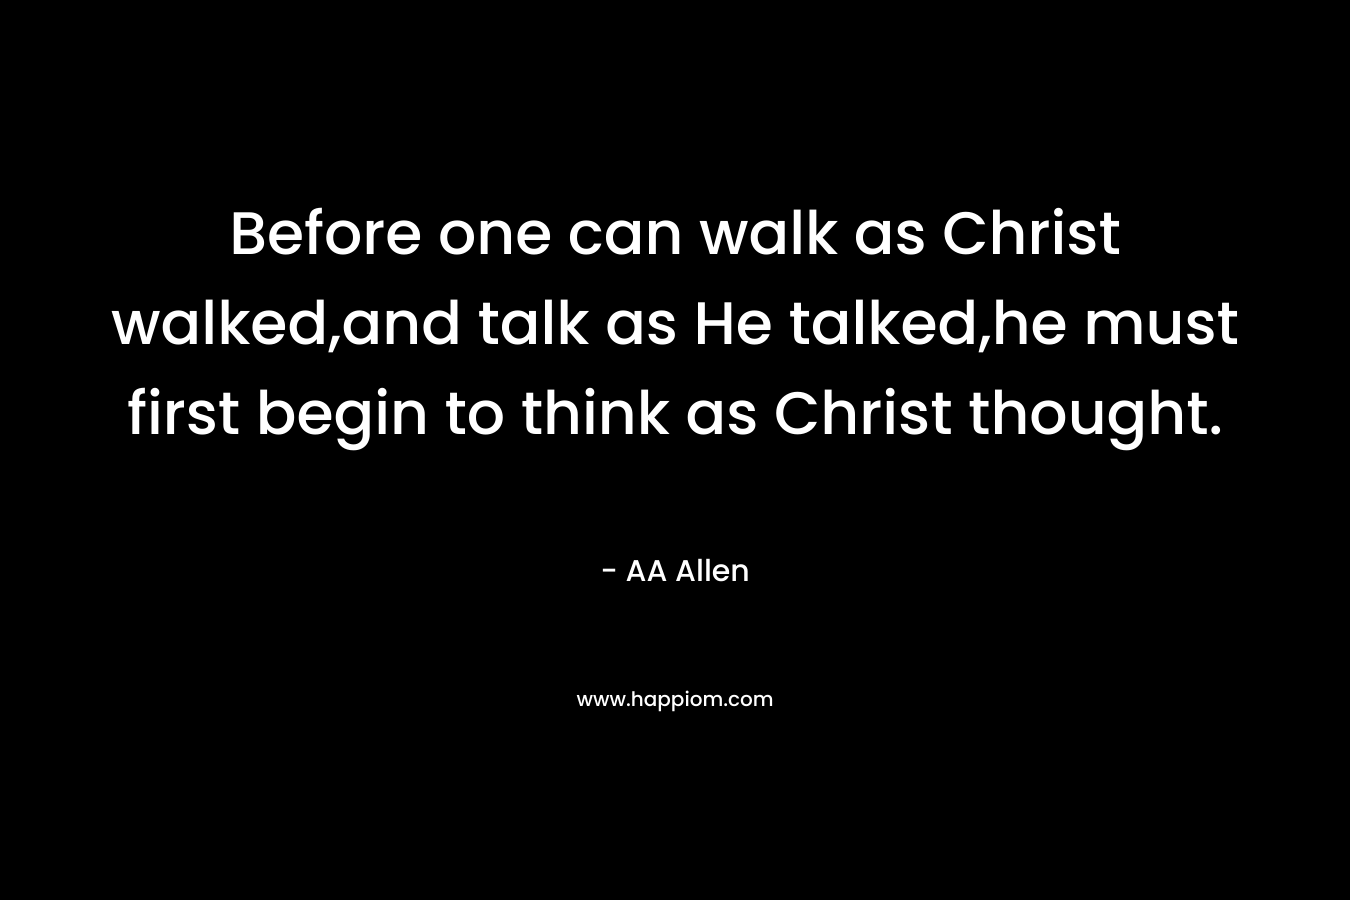 Before one can walk as Christ walked,and talk as He talked,he must first begin to think as Christ thought.